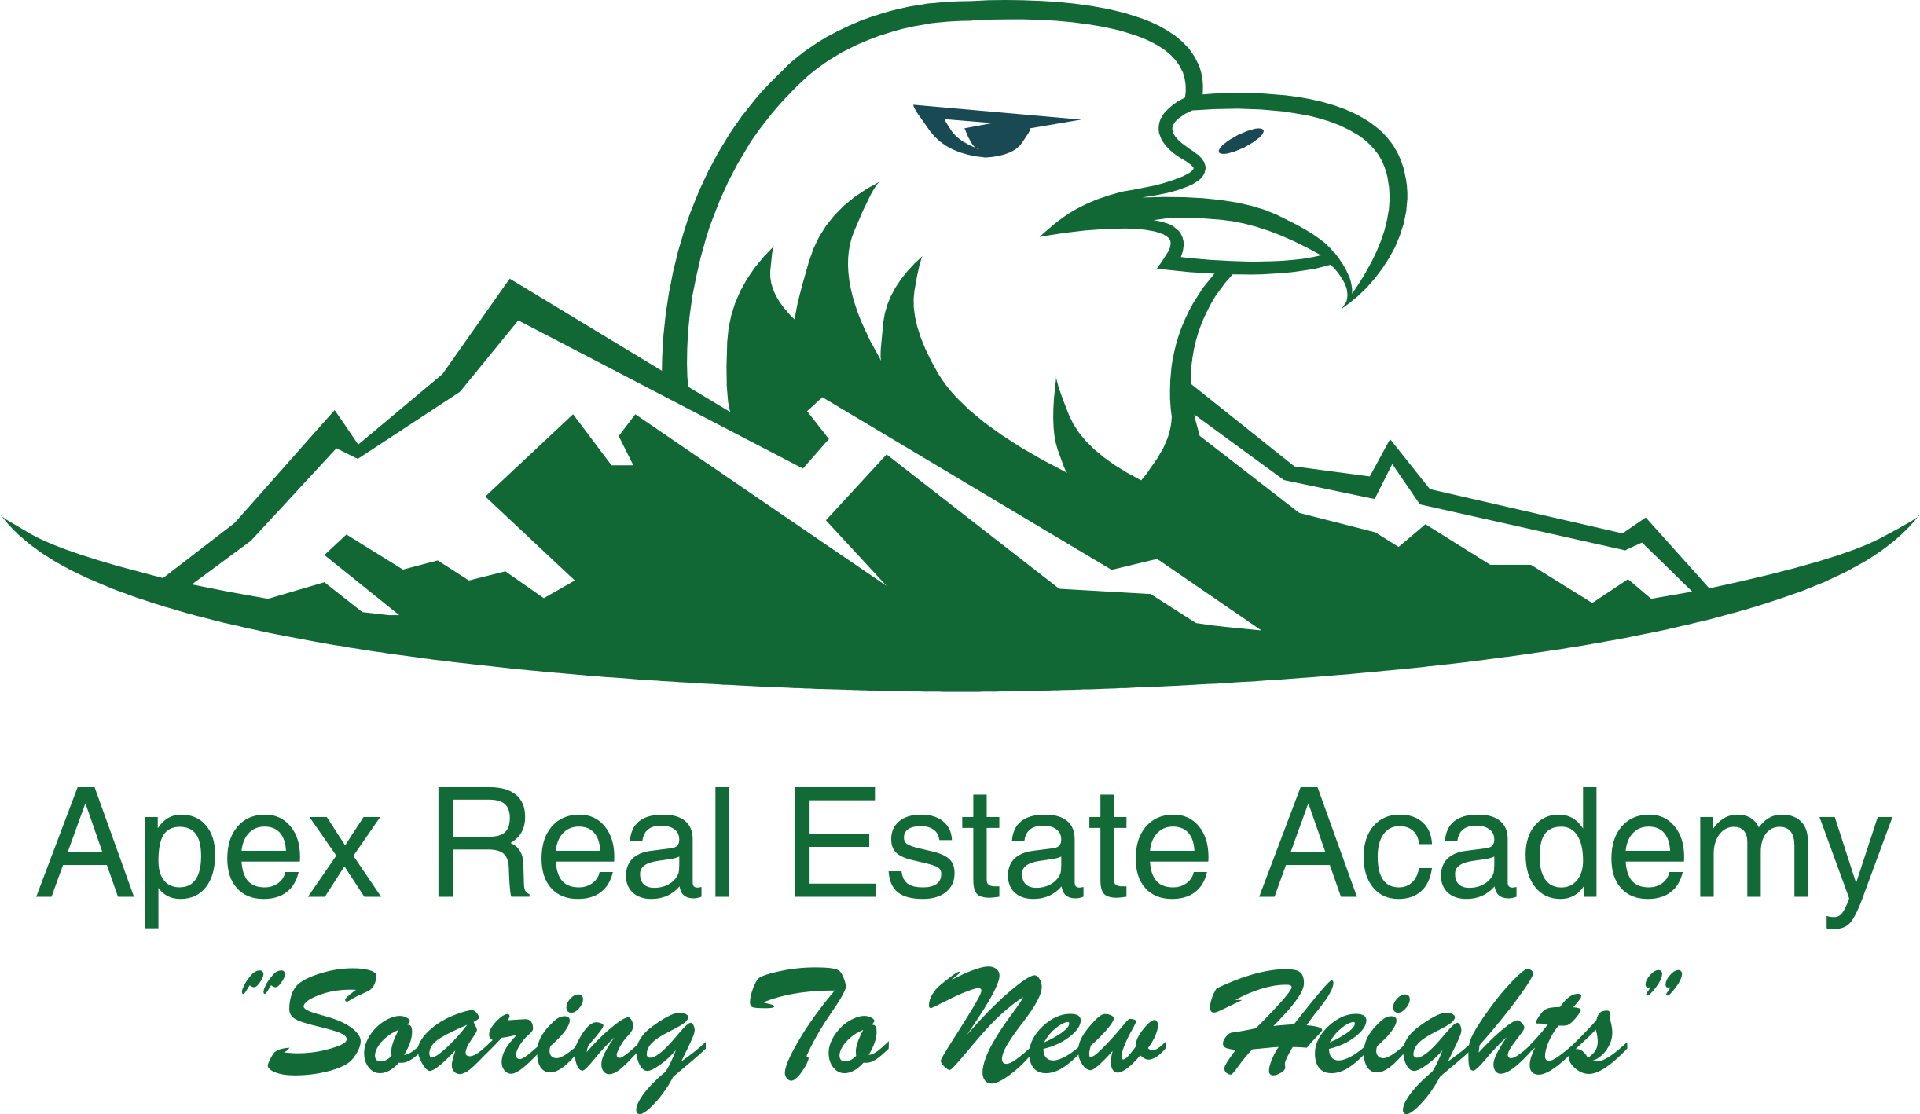 First Ever Black Woman-Owned Real Estate Academy Launches Online and On-Site Real Estate Courses